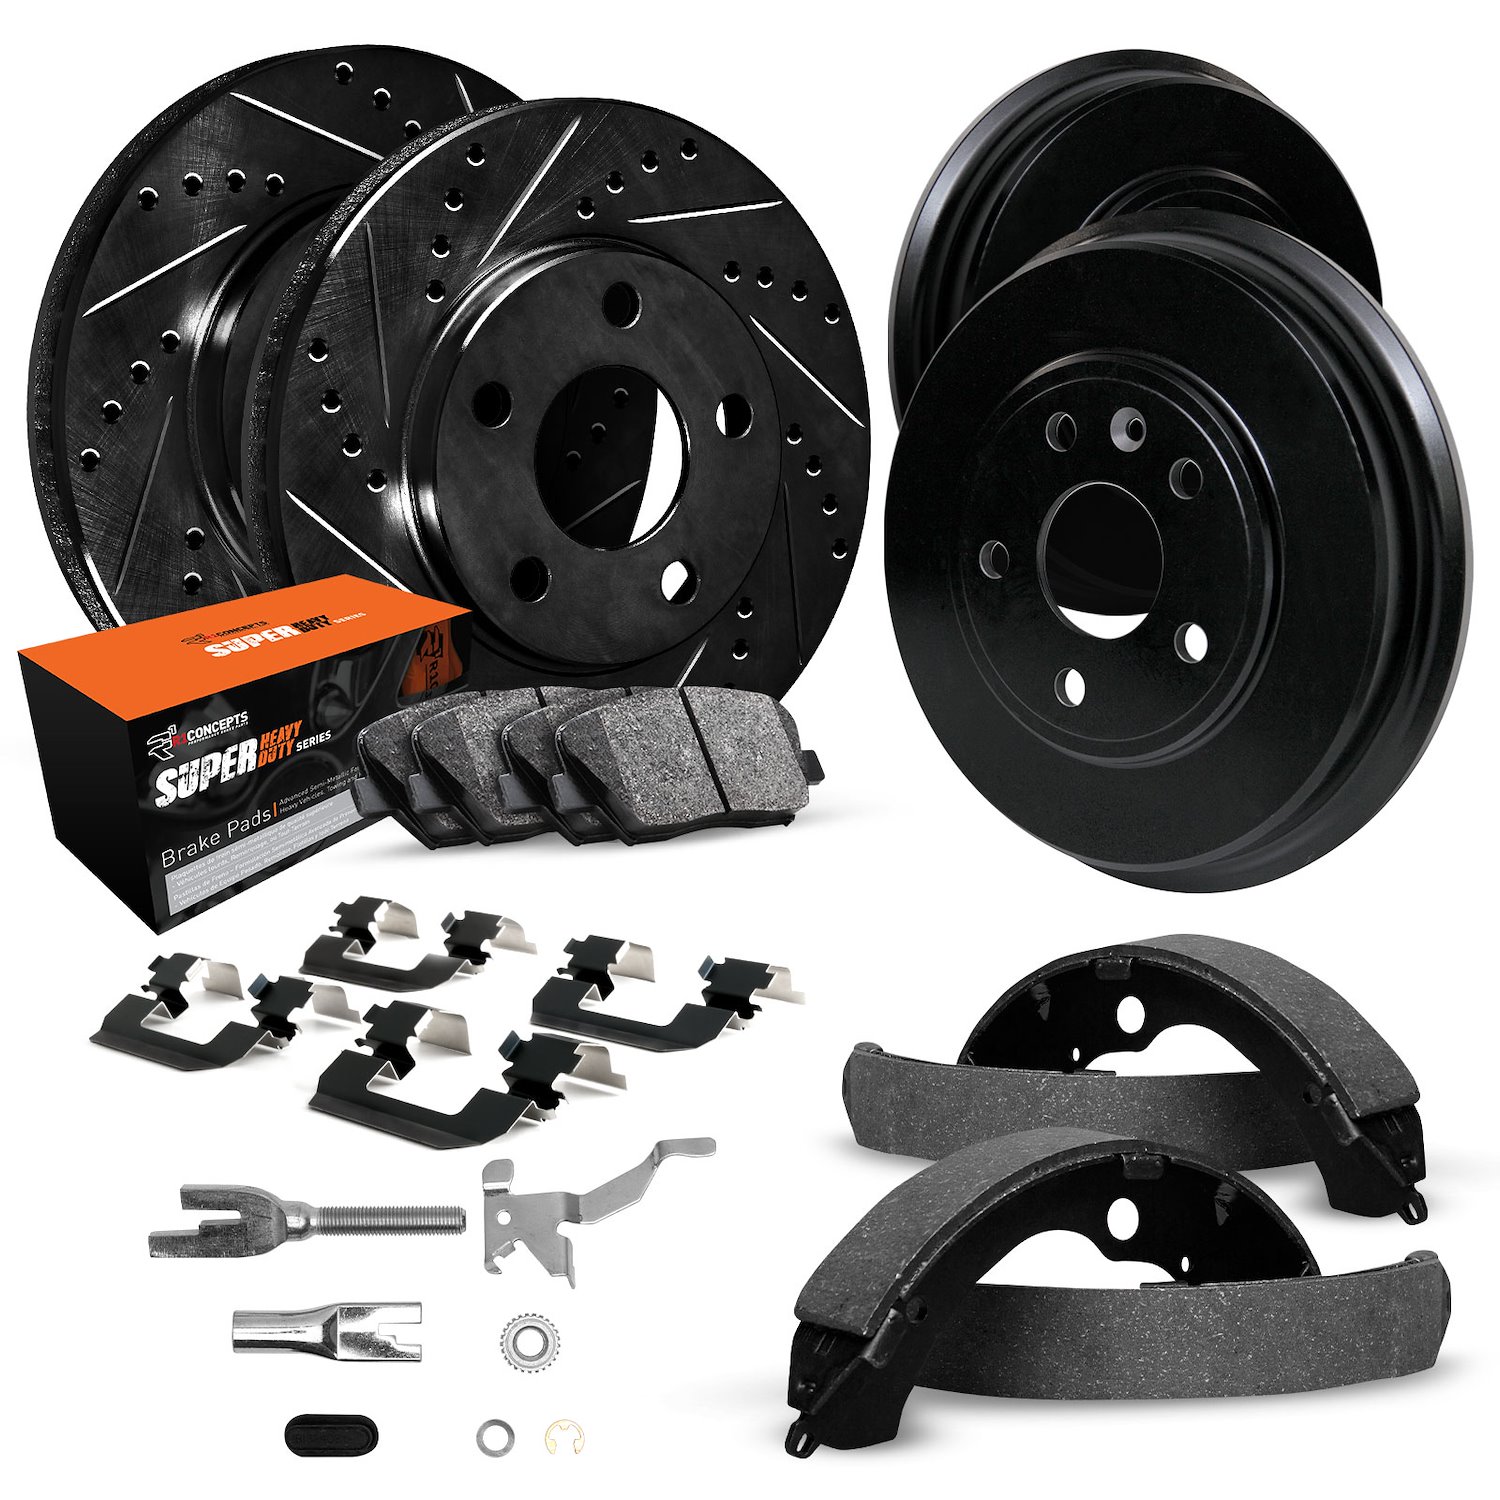 E-Line Drilled/Slotted Black Rotor & Drum Set w/Super-Duty Pads, Shoes, Hardware/Adjusters, 2001-2002 GM